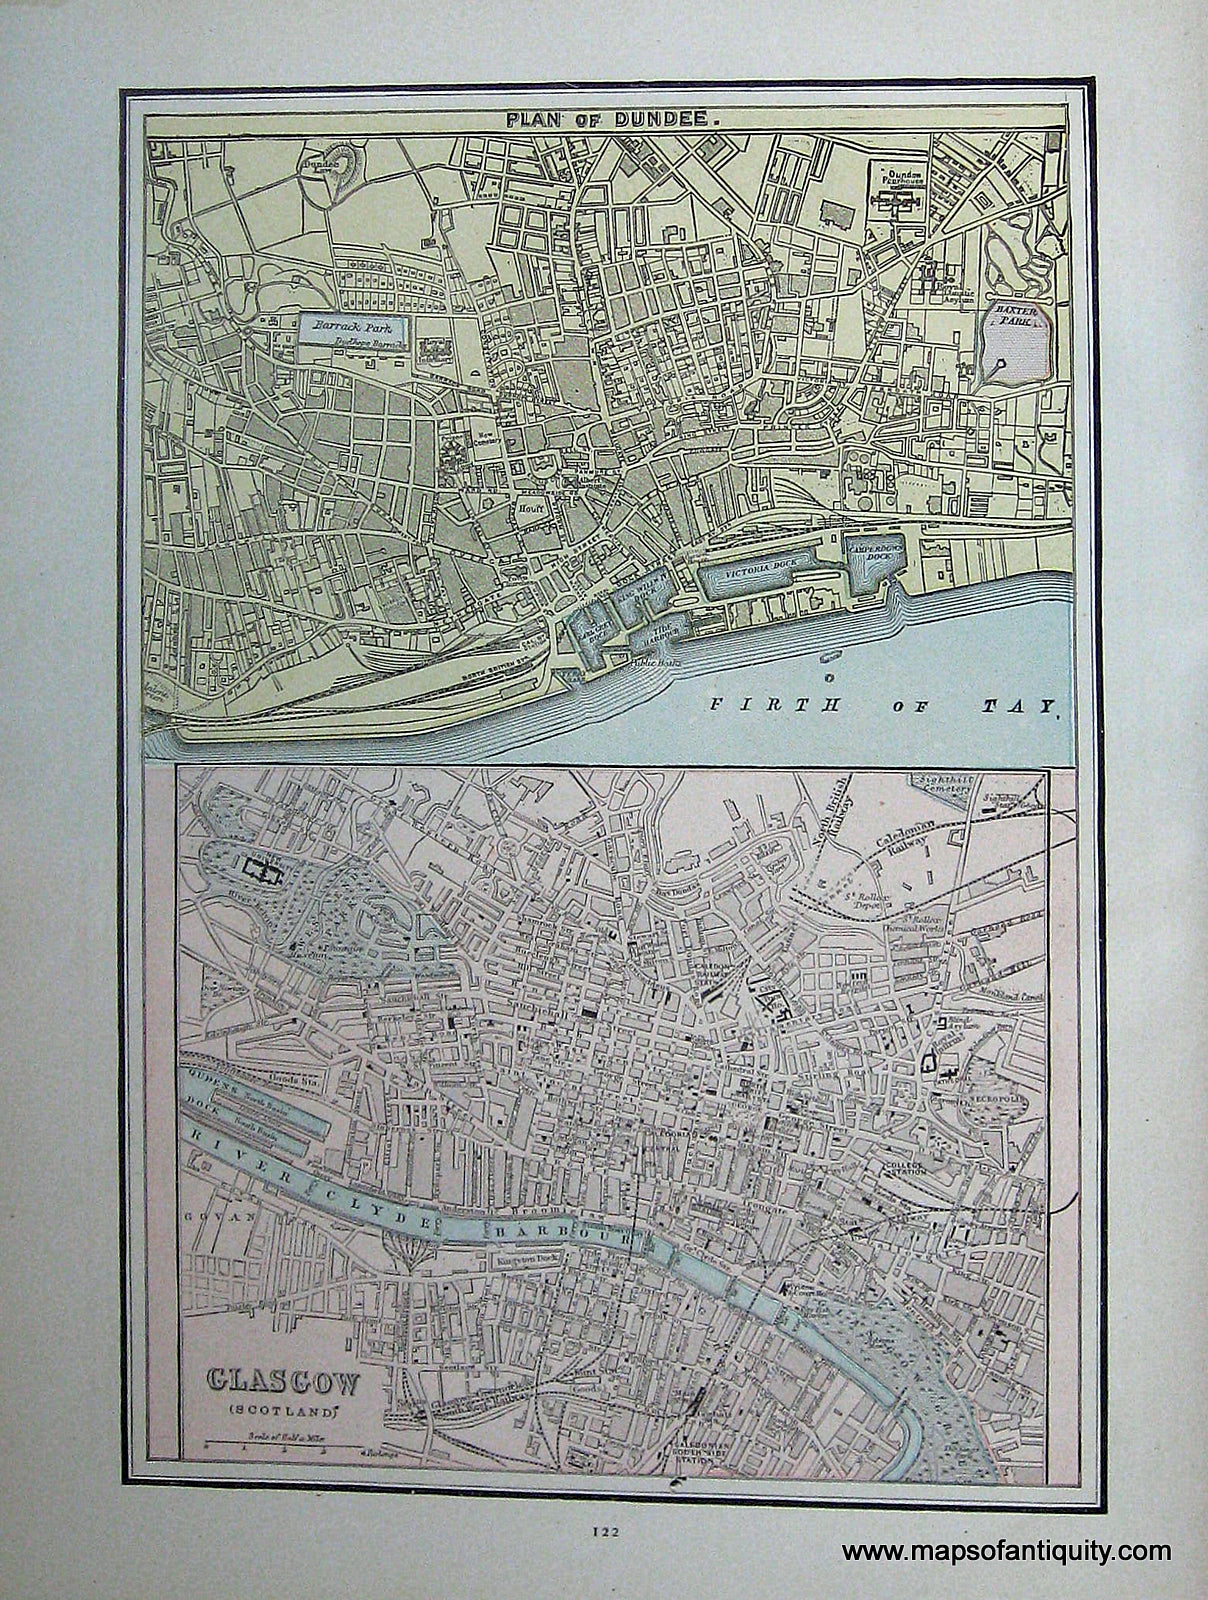 Antique-City-Plan-Glasgow-(Scotland)-and-Plan-of-Dundee.**********-Towns-and-Cities-Scotland-1891-Goldthwaite-Maps-Of-Antiquity